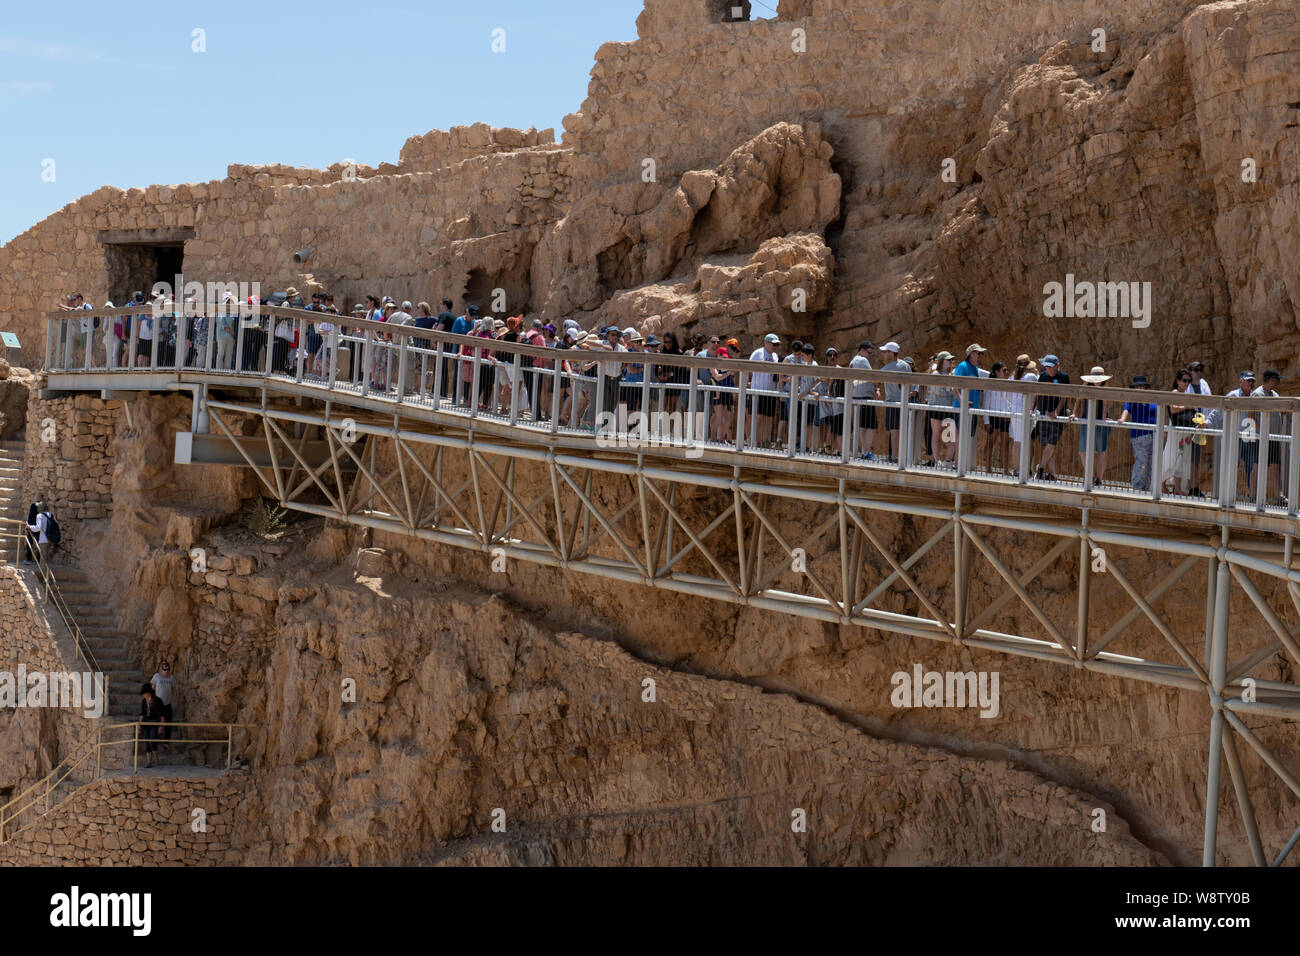 Israel, Masada National Park aka Massada. Pedestrian walkway near the cable car exit and Snake Path Gate at the summit. Line waiting for cable car. Stock Photo